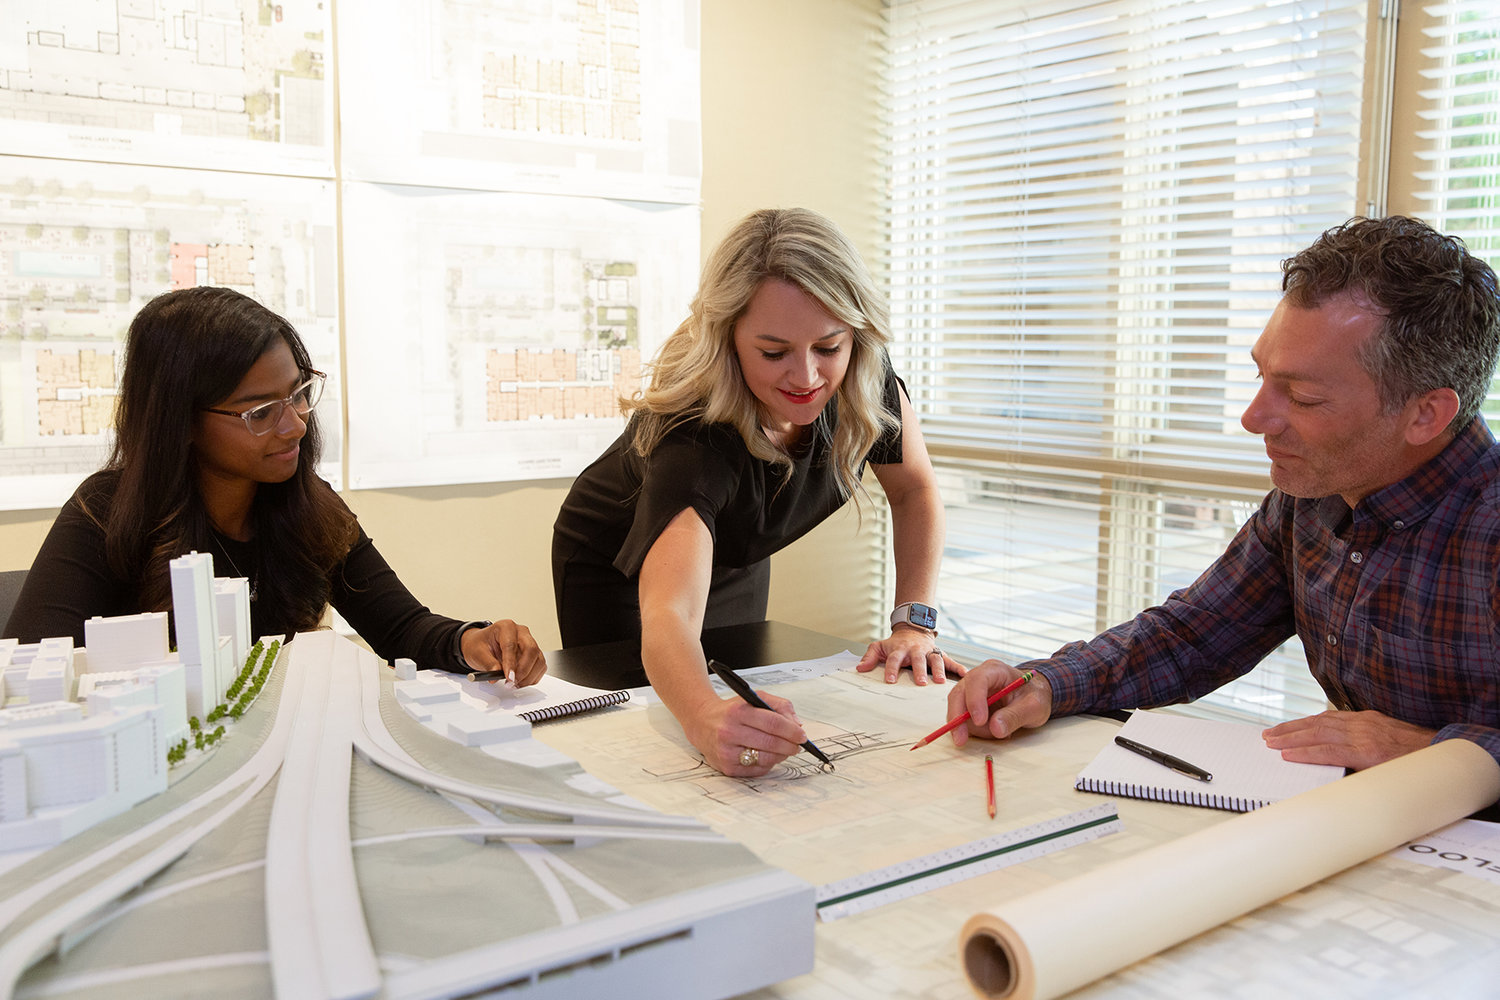 Shannon Bearden (center) goes over plans with Varini Nathany (left) and Salvatore Buccellato in Tryba's Denver office.